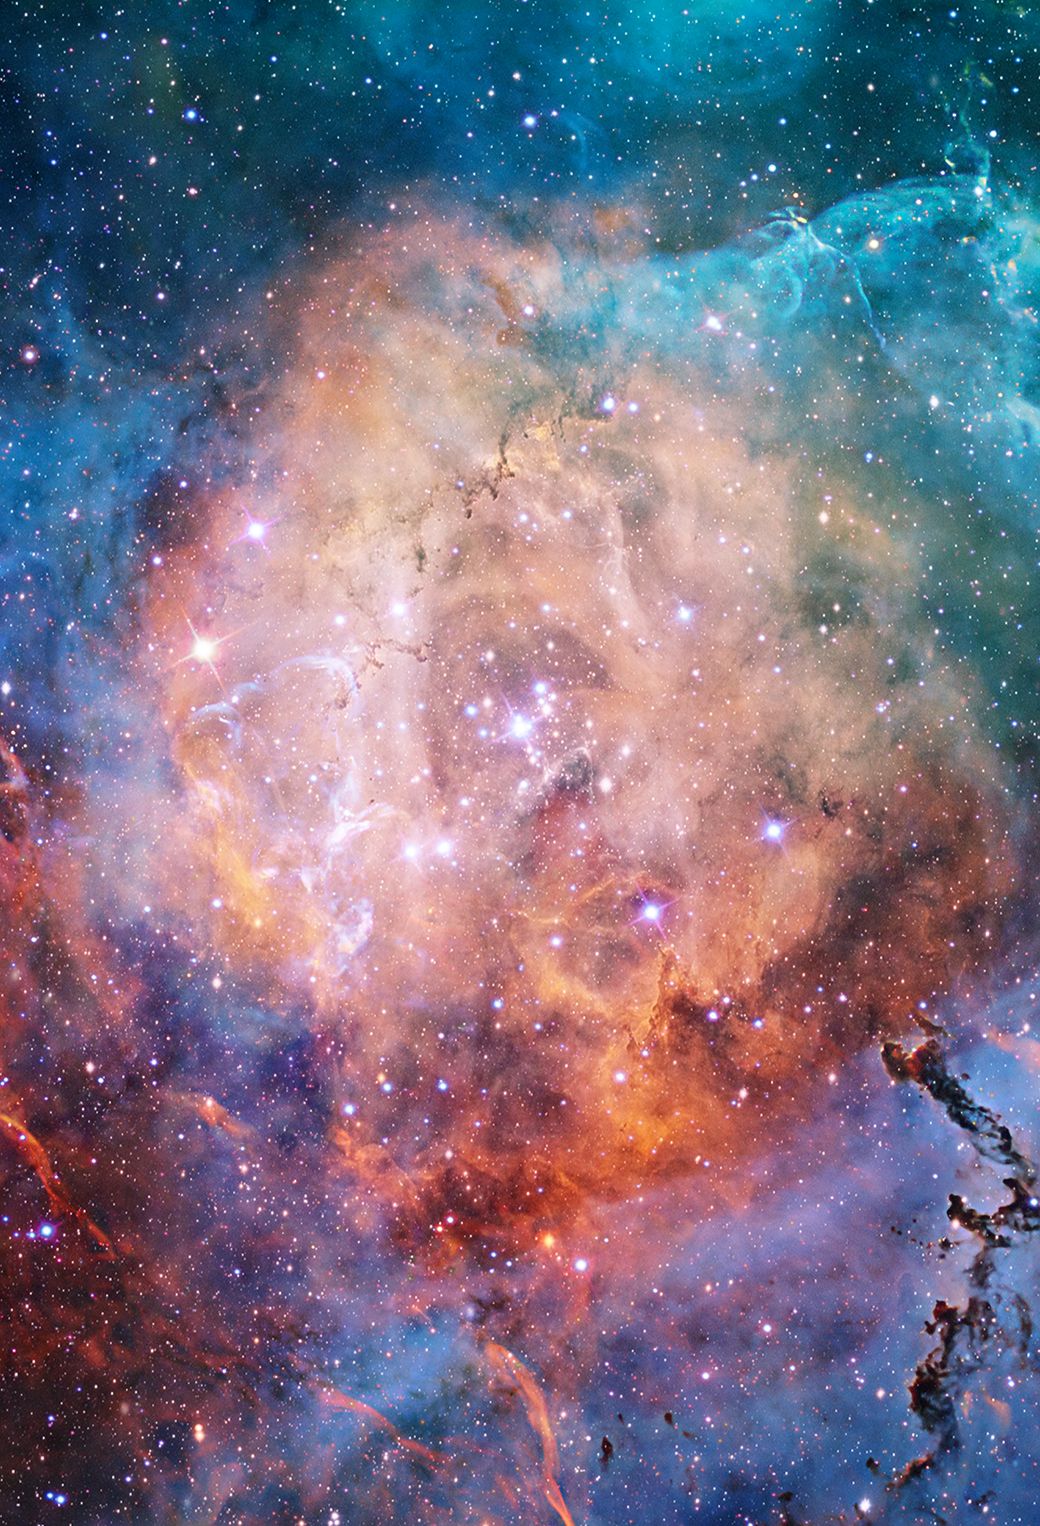 The Carina Nebula is a star-forming region in the southern constellation of Carina. - Space